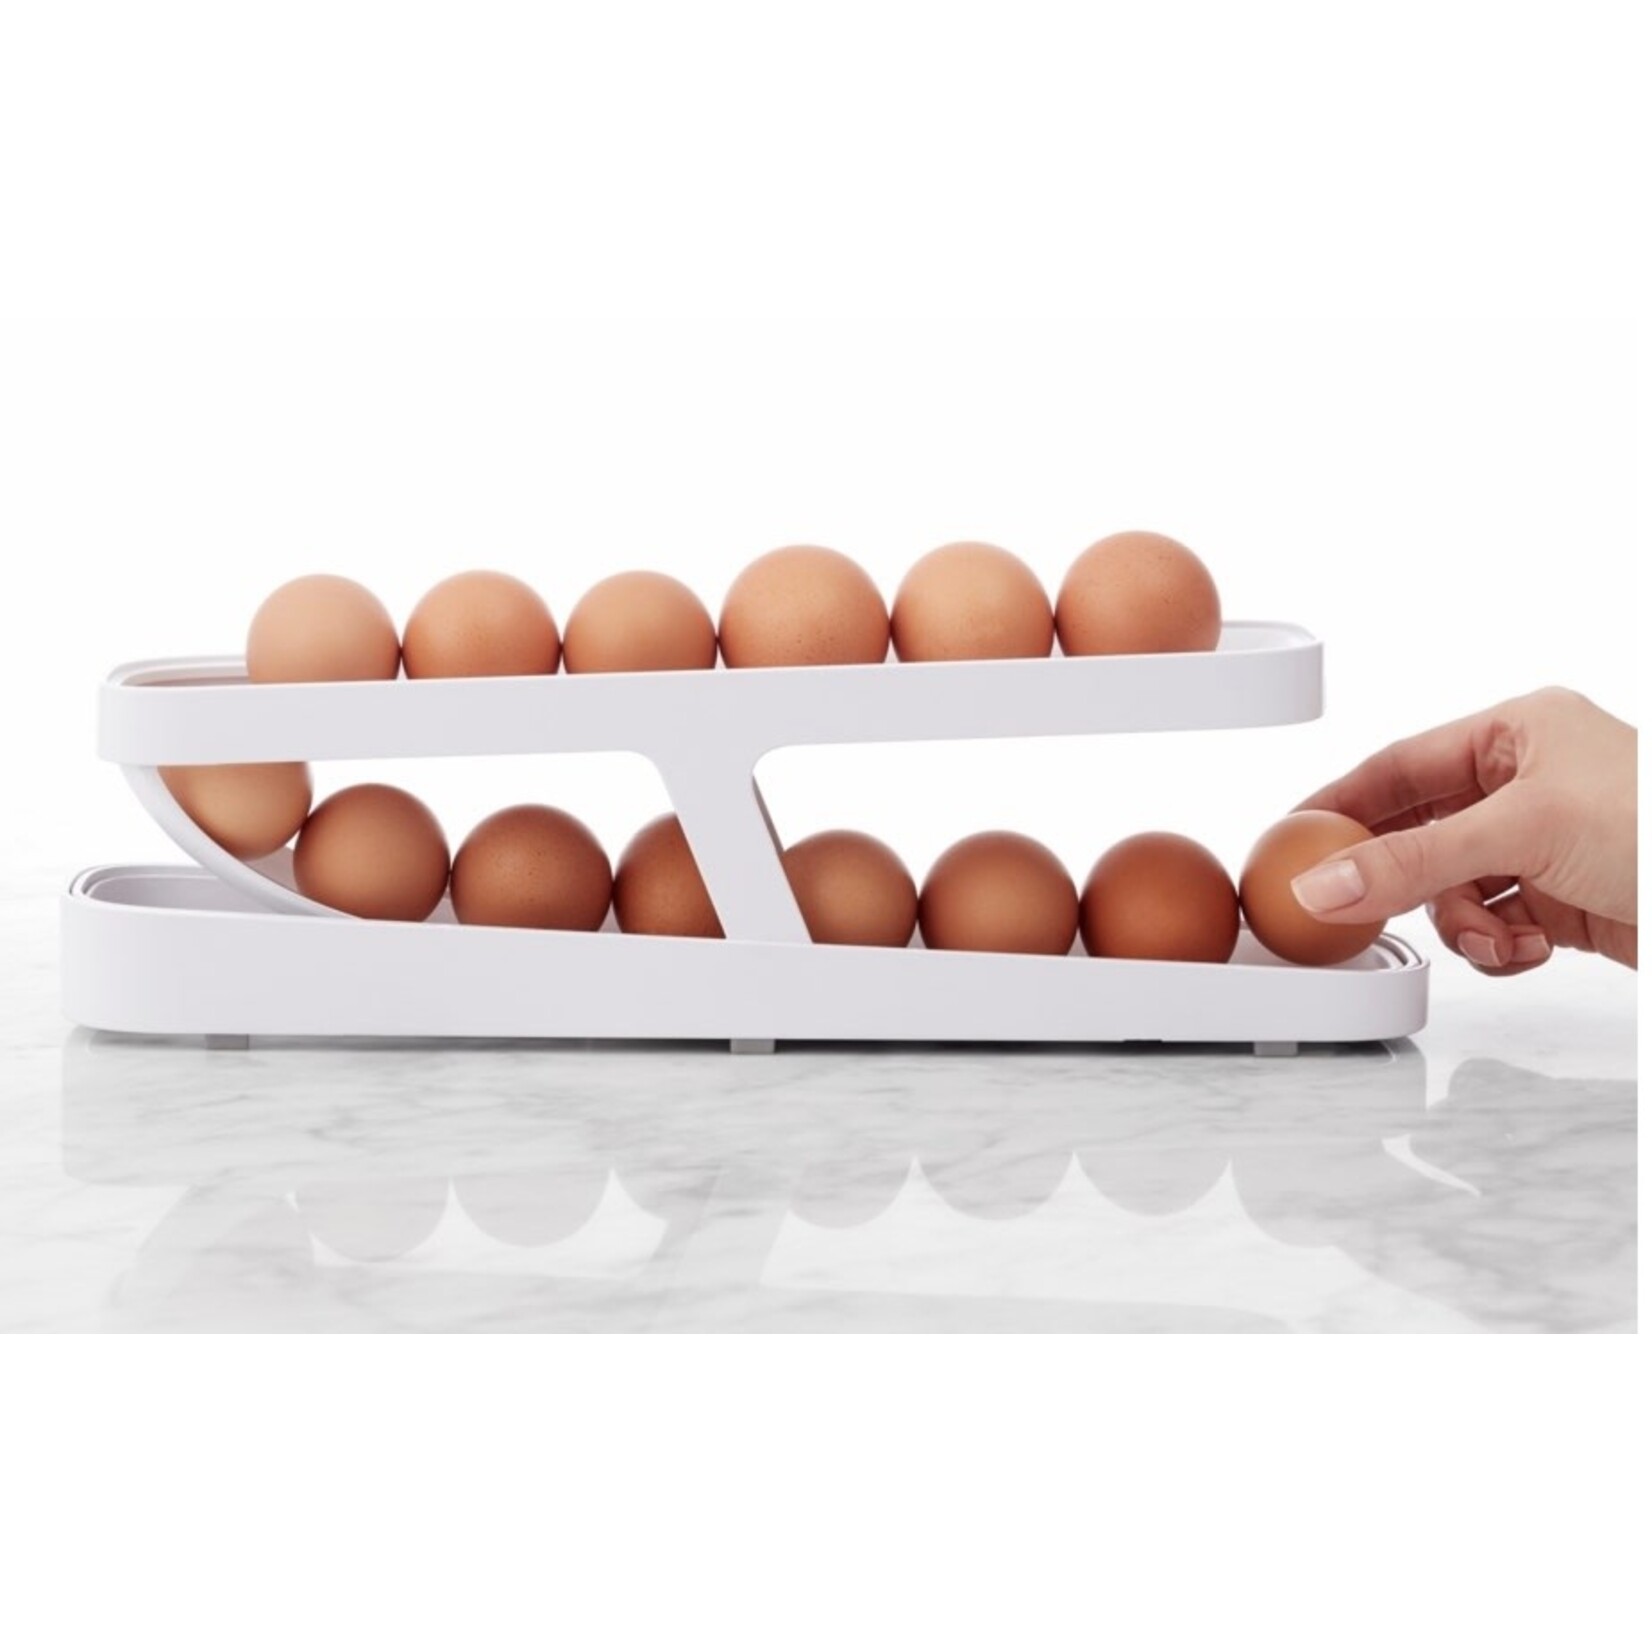 PORT STYLE YOUCOPIA Egg Dispenser Rolldown Two-TIer